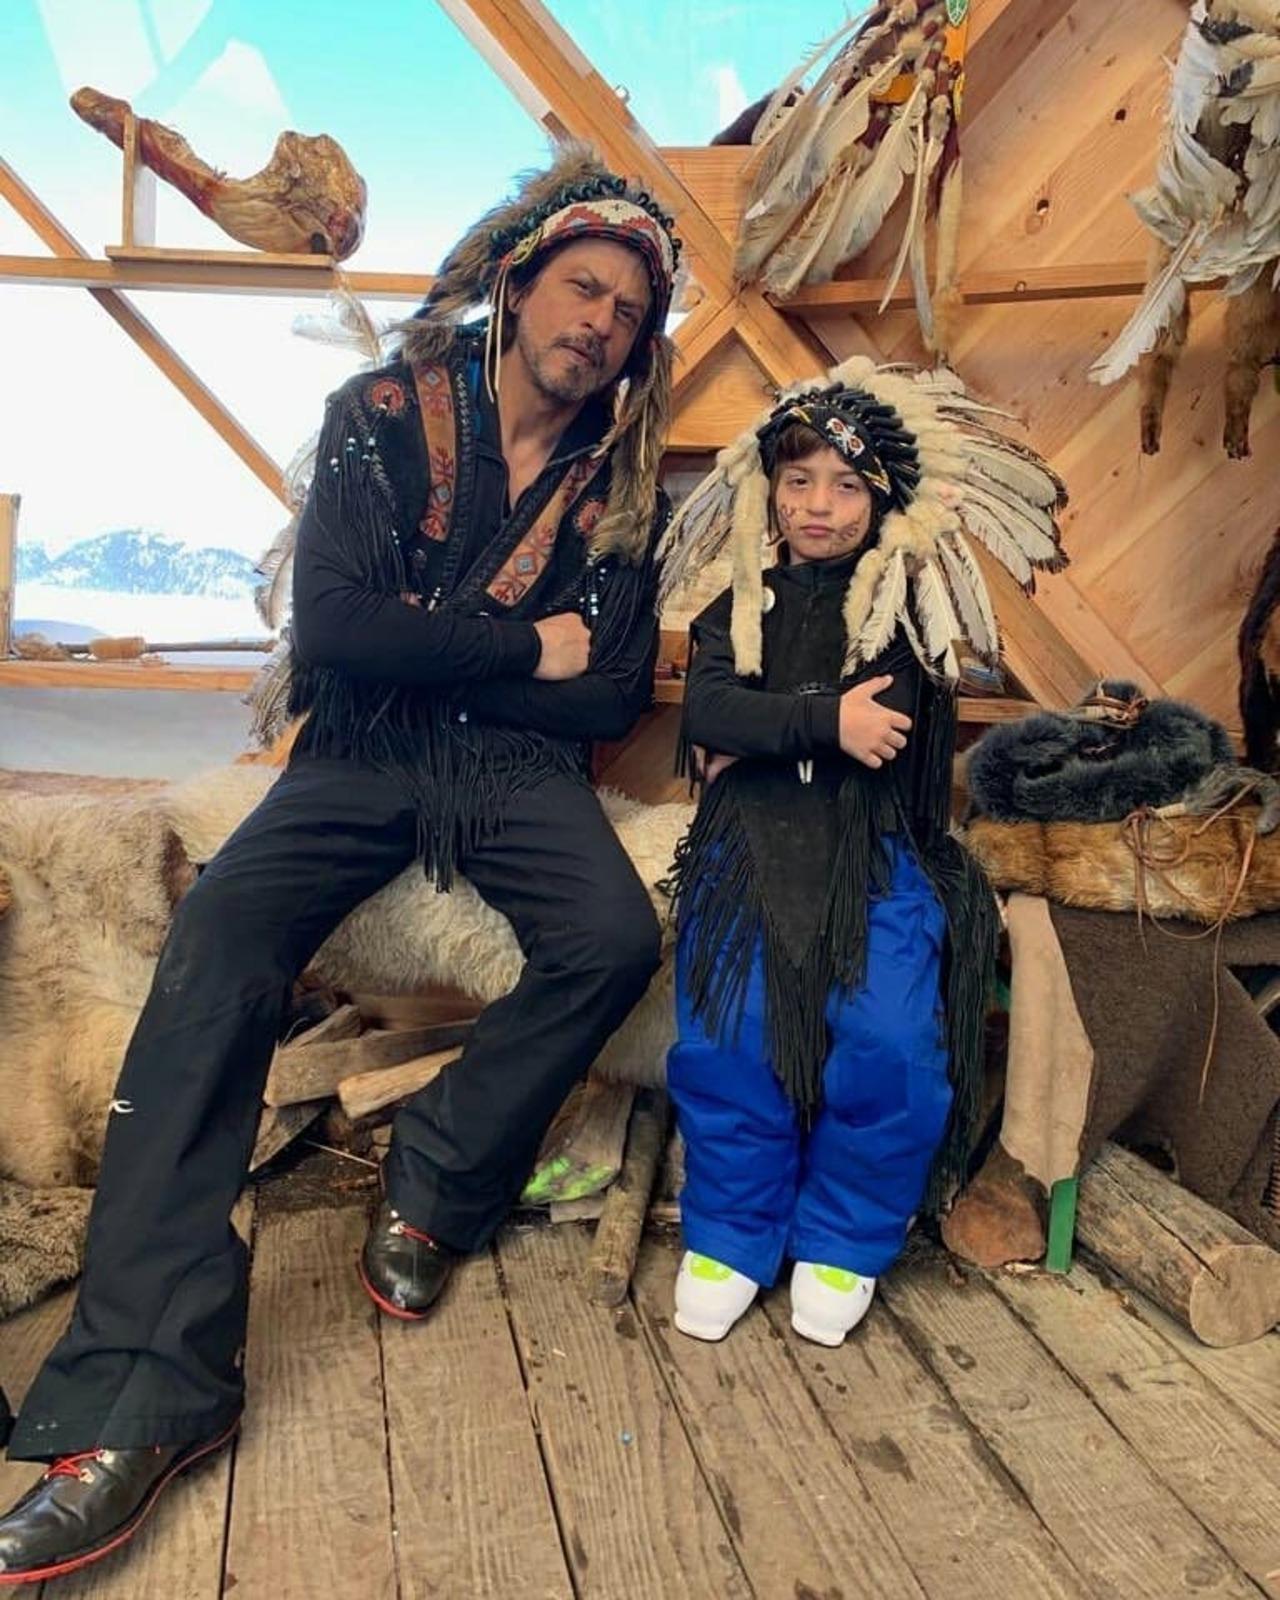 SRK and AbRam play dress up and are in Pirate mode